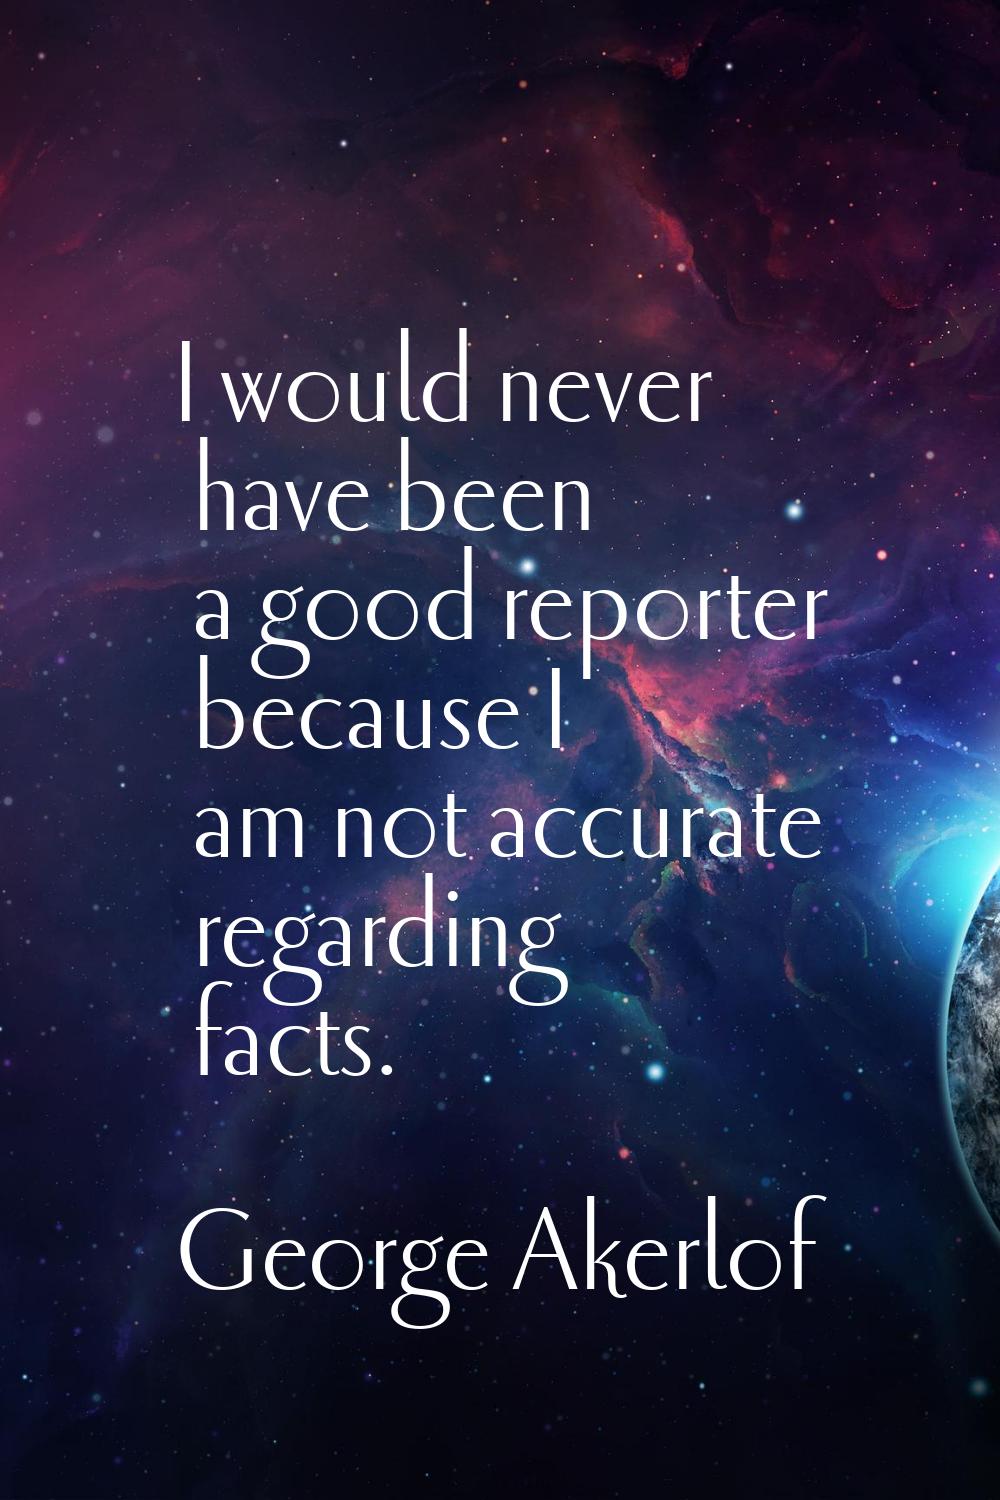 I would never have been a good reporter because I am not accurate regarding facts.